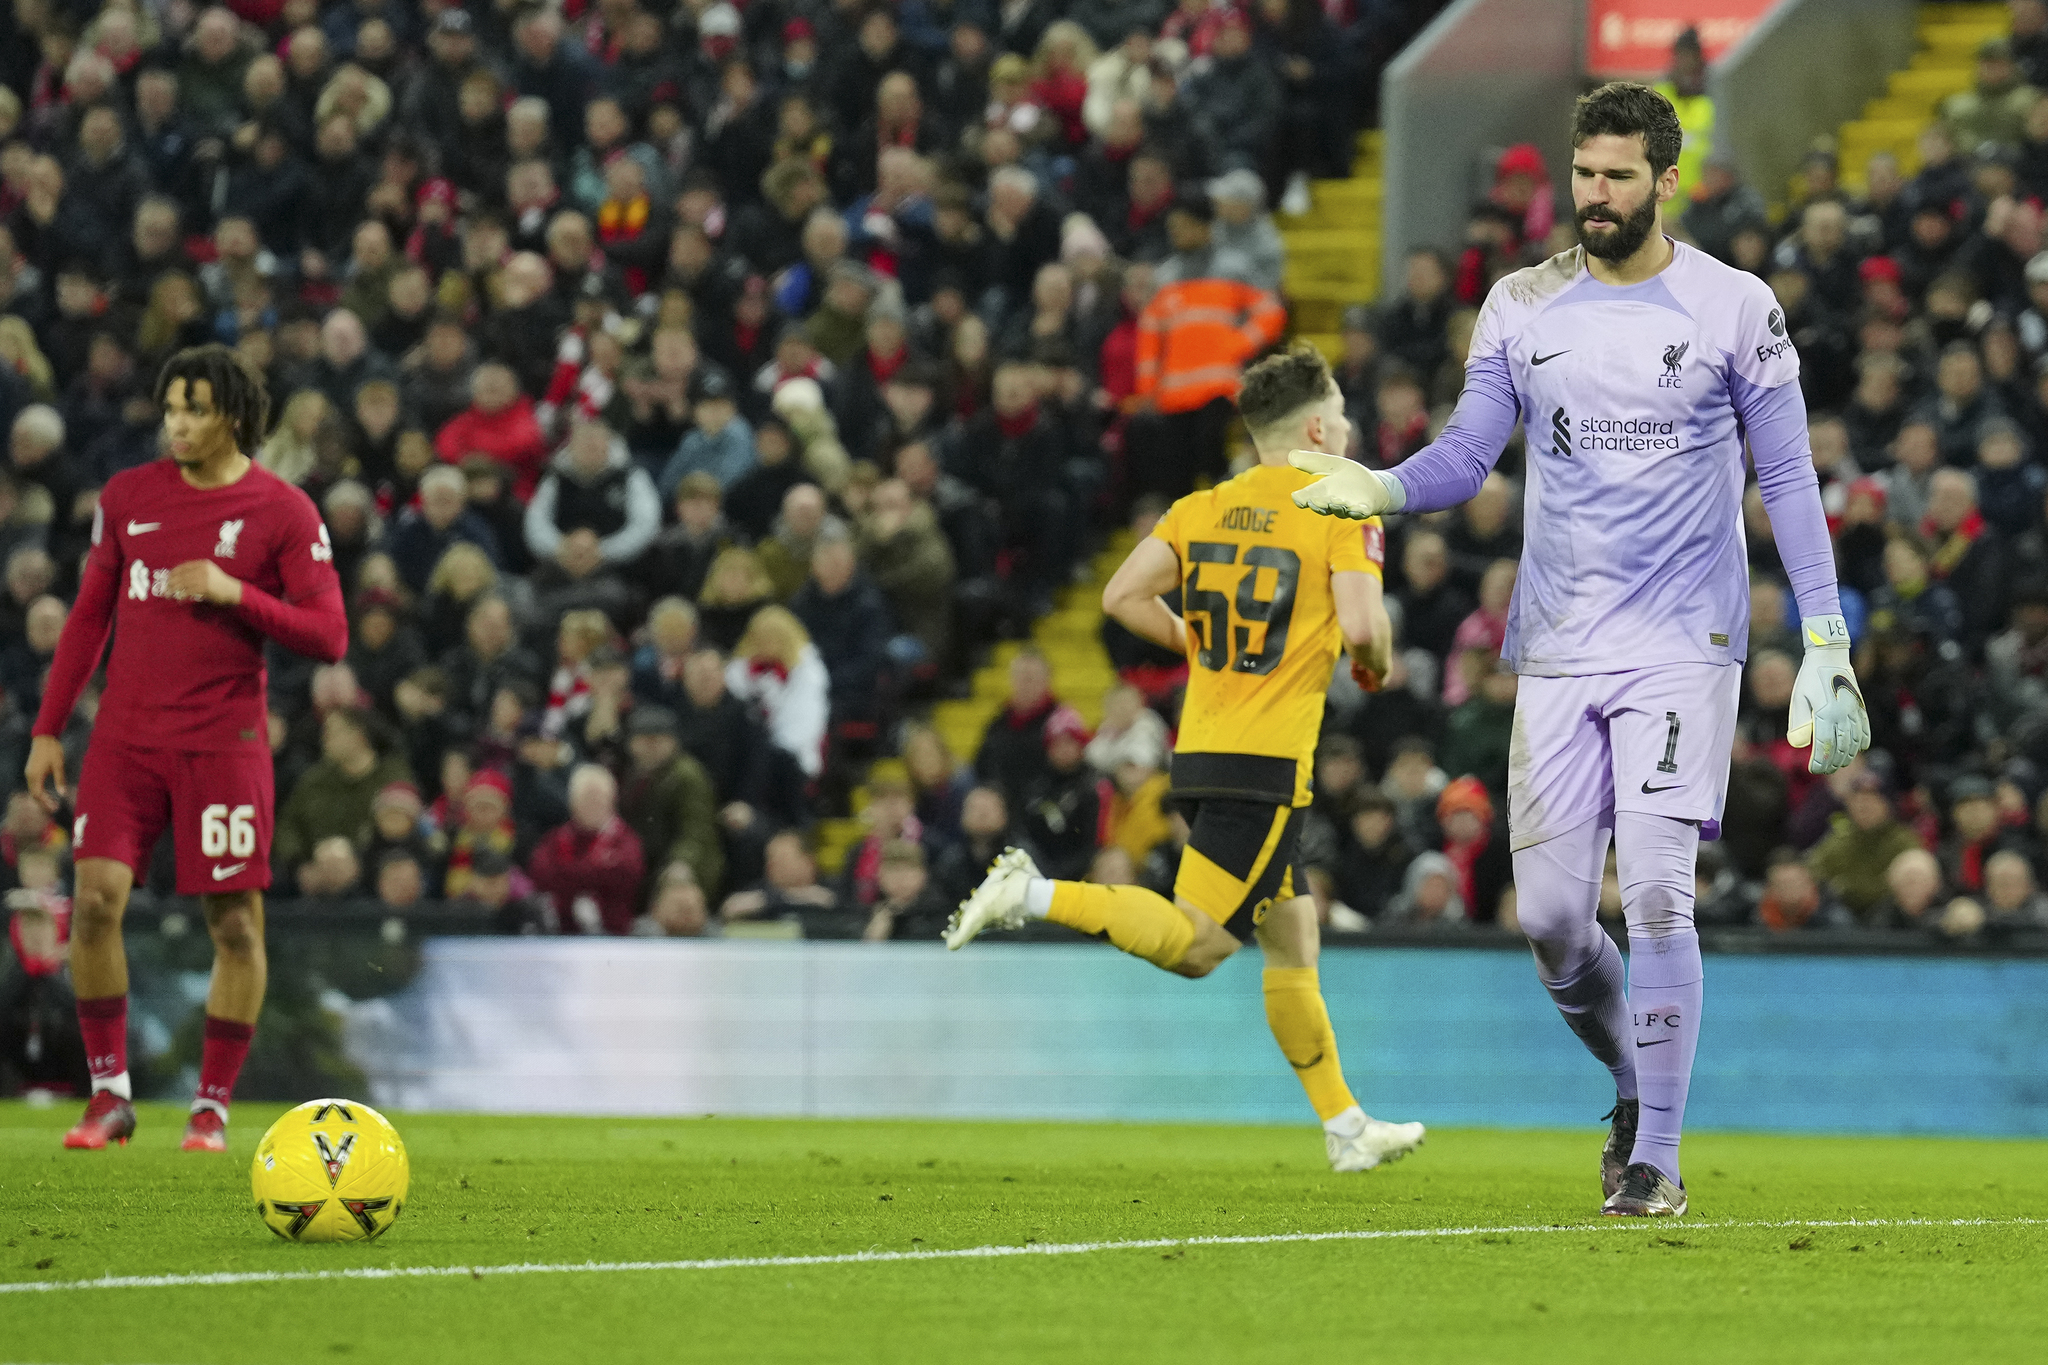 Liverpool goalkeeper Alisson after conceding the opening goal to Wolverhampton Wanderers' Goncalo Guedes